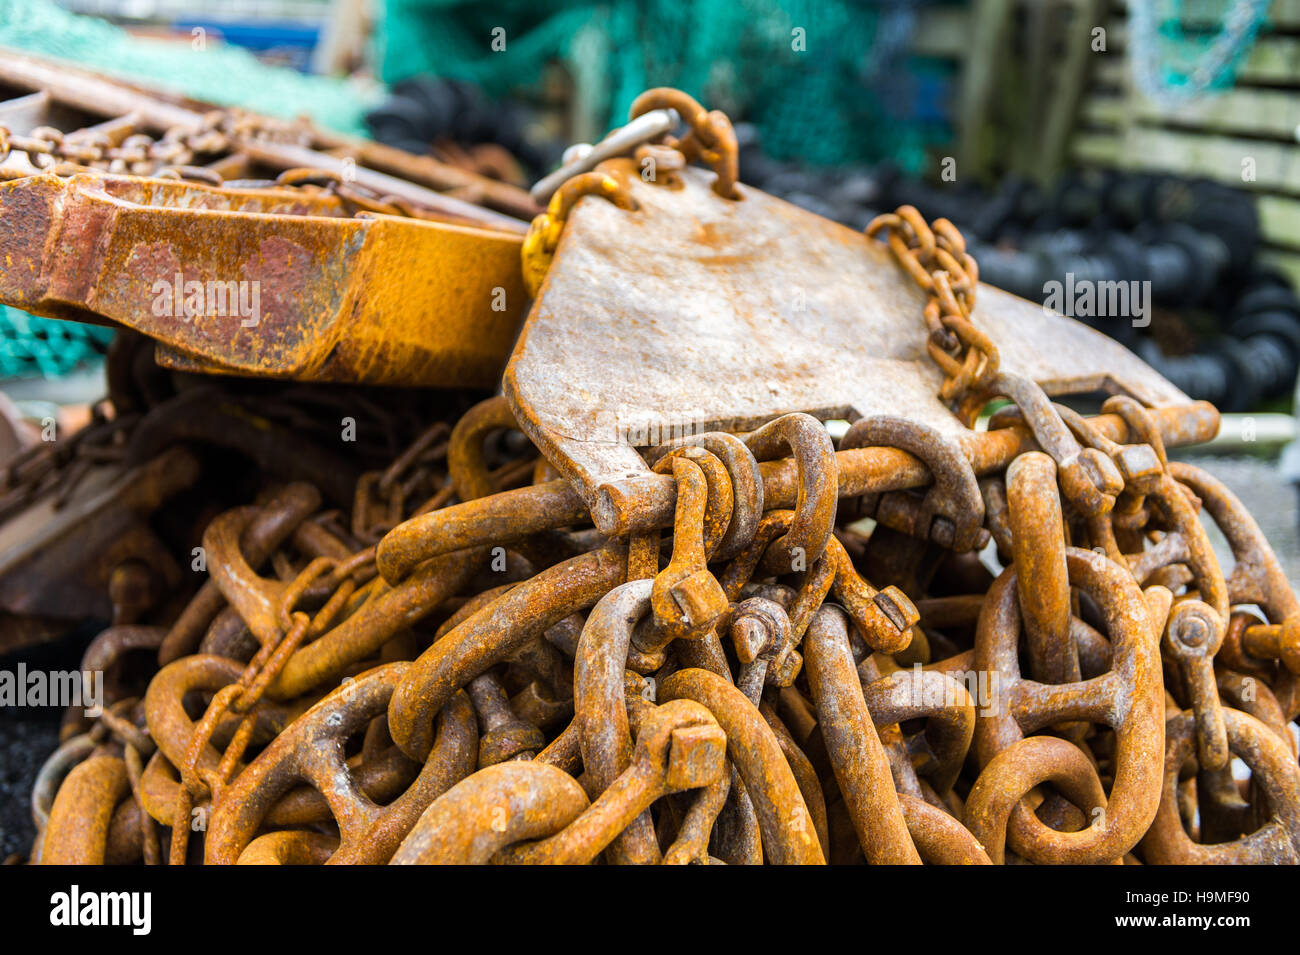 Rusty commercial fishing equipment pictured on the dock side/quay. Stock Photo